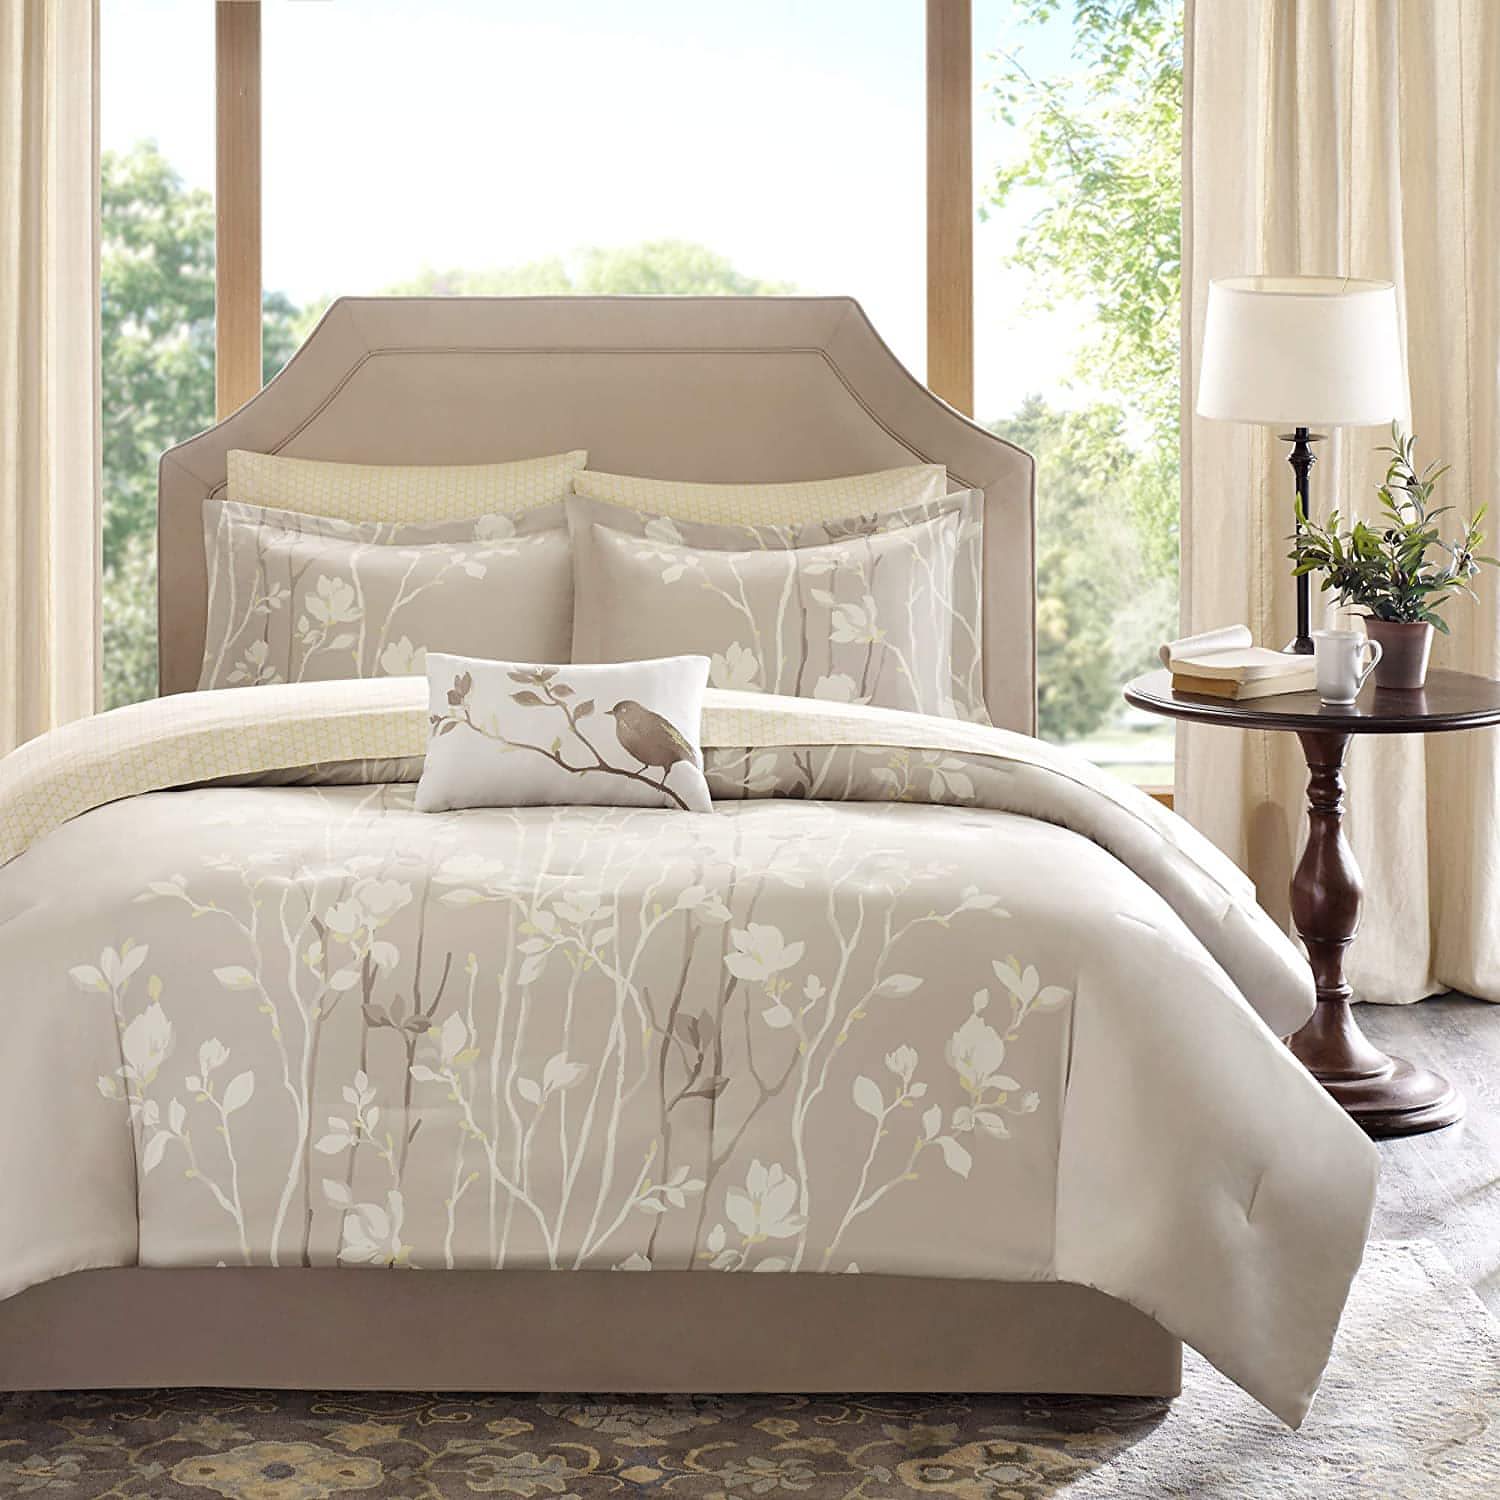 Madison Park Essentials Cozy Bed In A Bag Comforter with Complete Cotton Sheet Set - Trendy Floral Design, All Season Cover, Decorative Pillow, Vaughn, Taupe Queen(90"x90") 9 Piece - Brandat Outlet